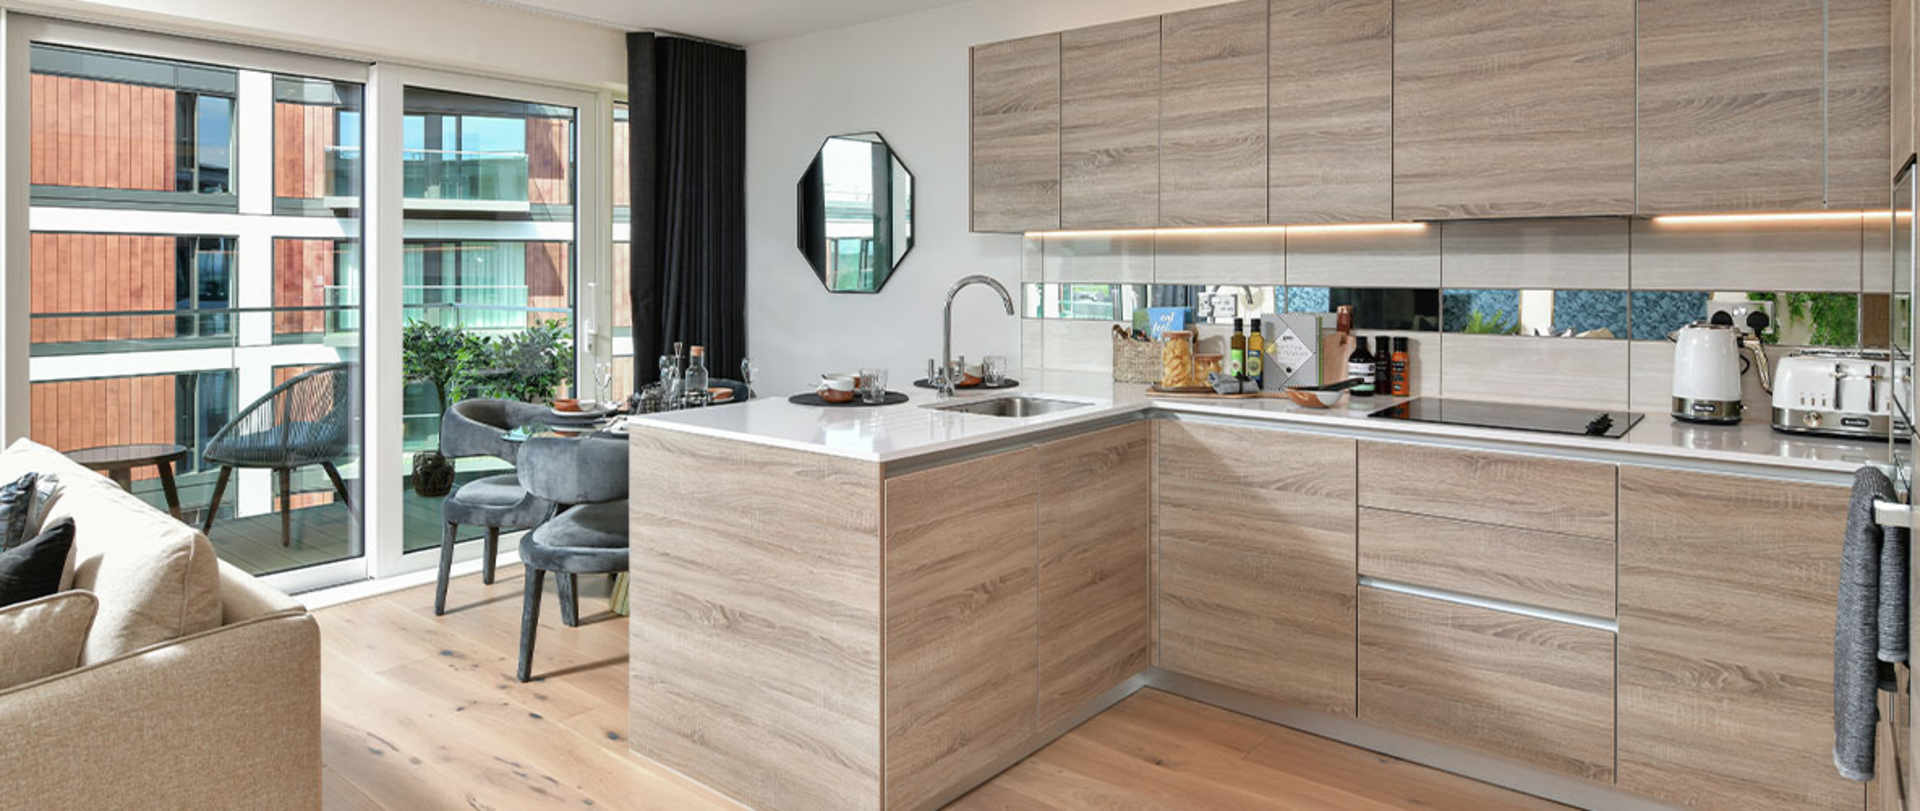 5 ways to get the penthouse look Kitchen